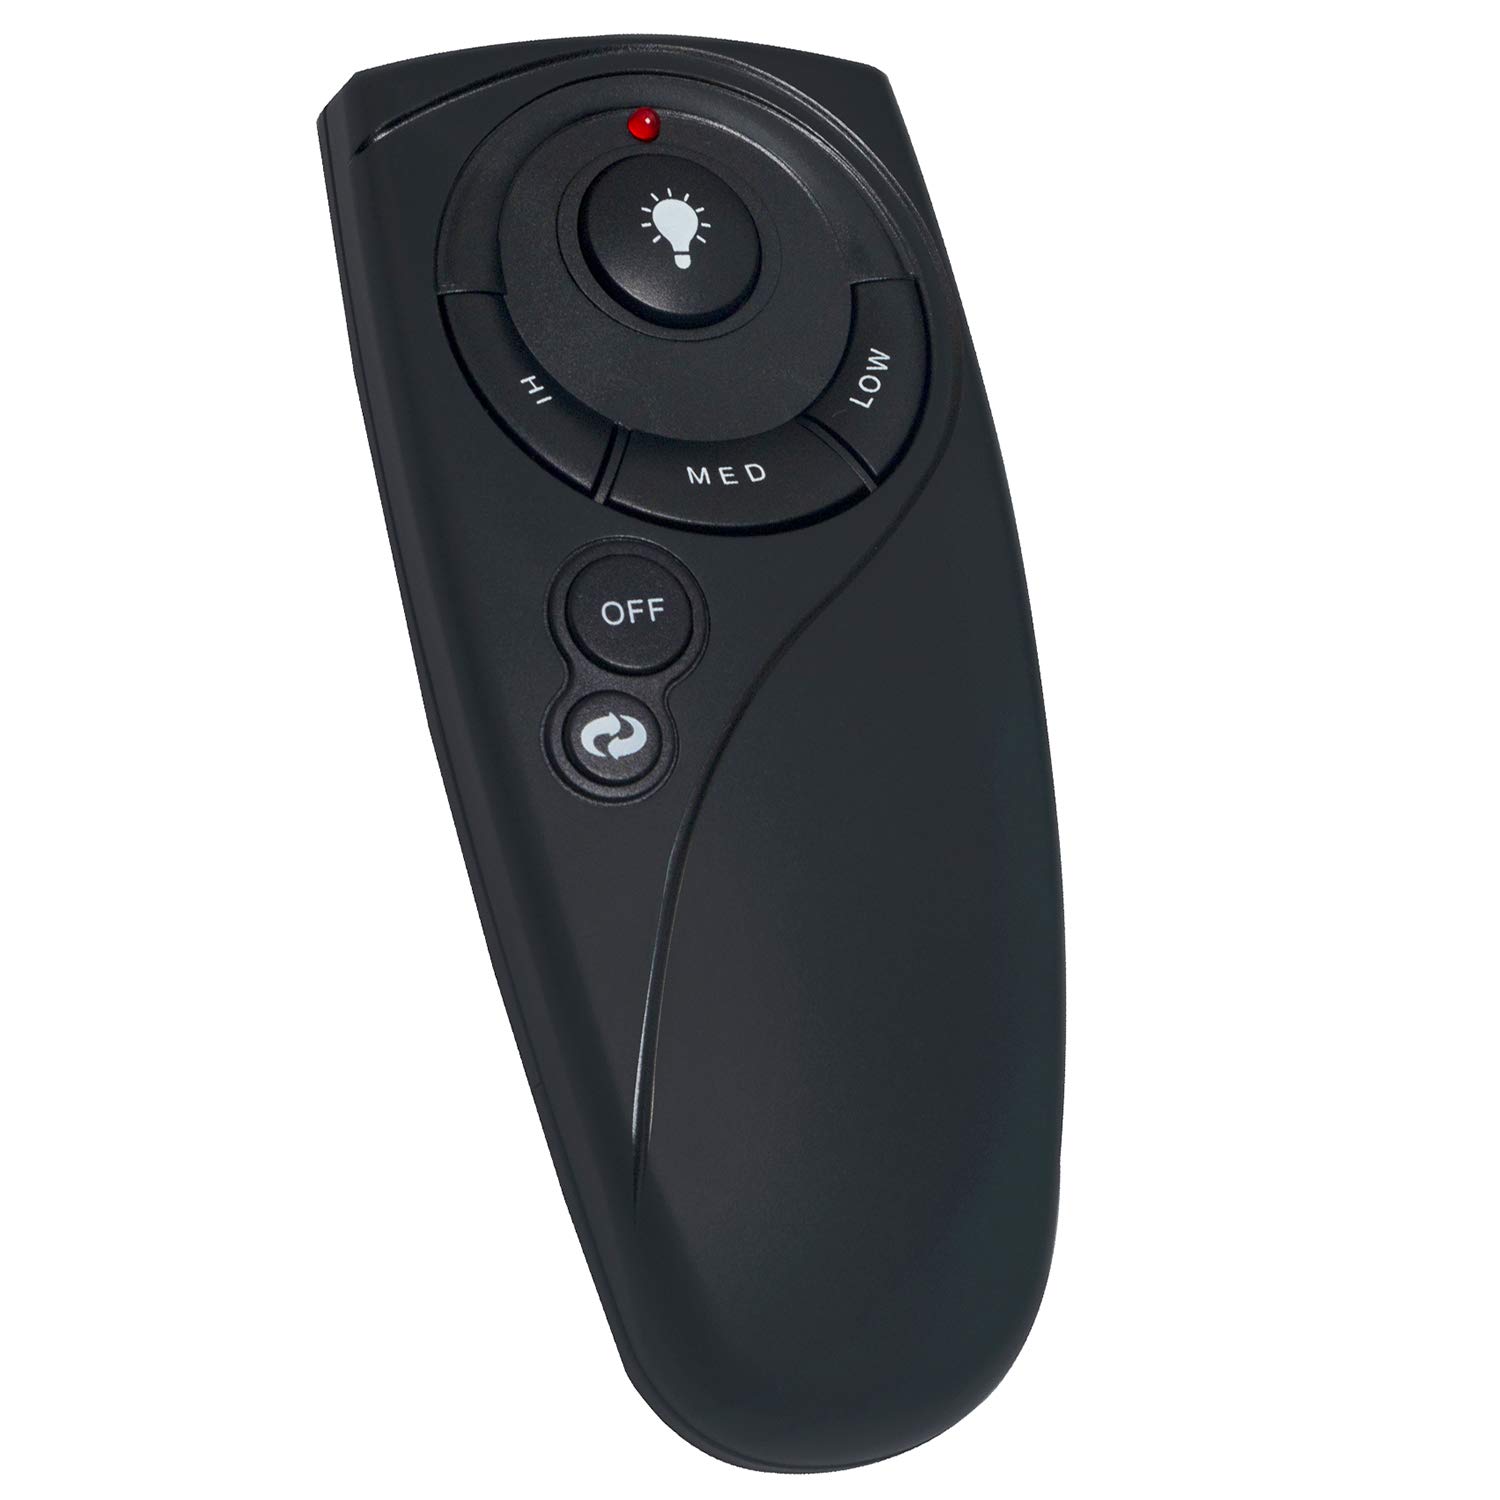 New UC7083T Replacement Remote Control fit for Hampton Bay Ceiling Fan Wire - Less Lights Control with Wall Holder